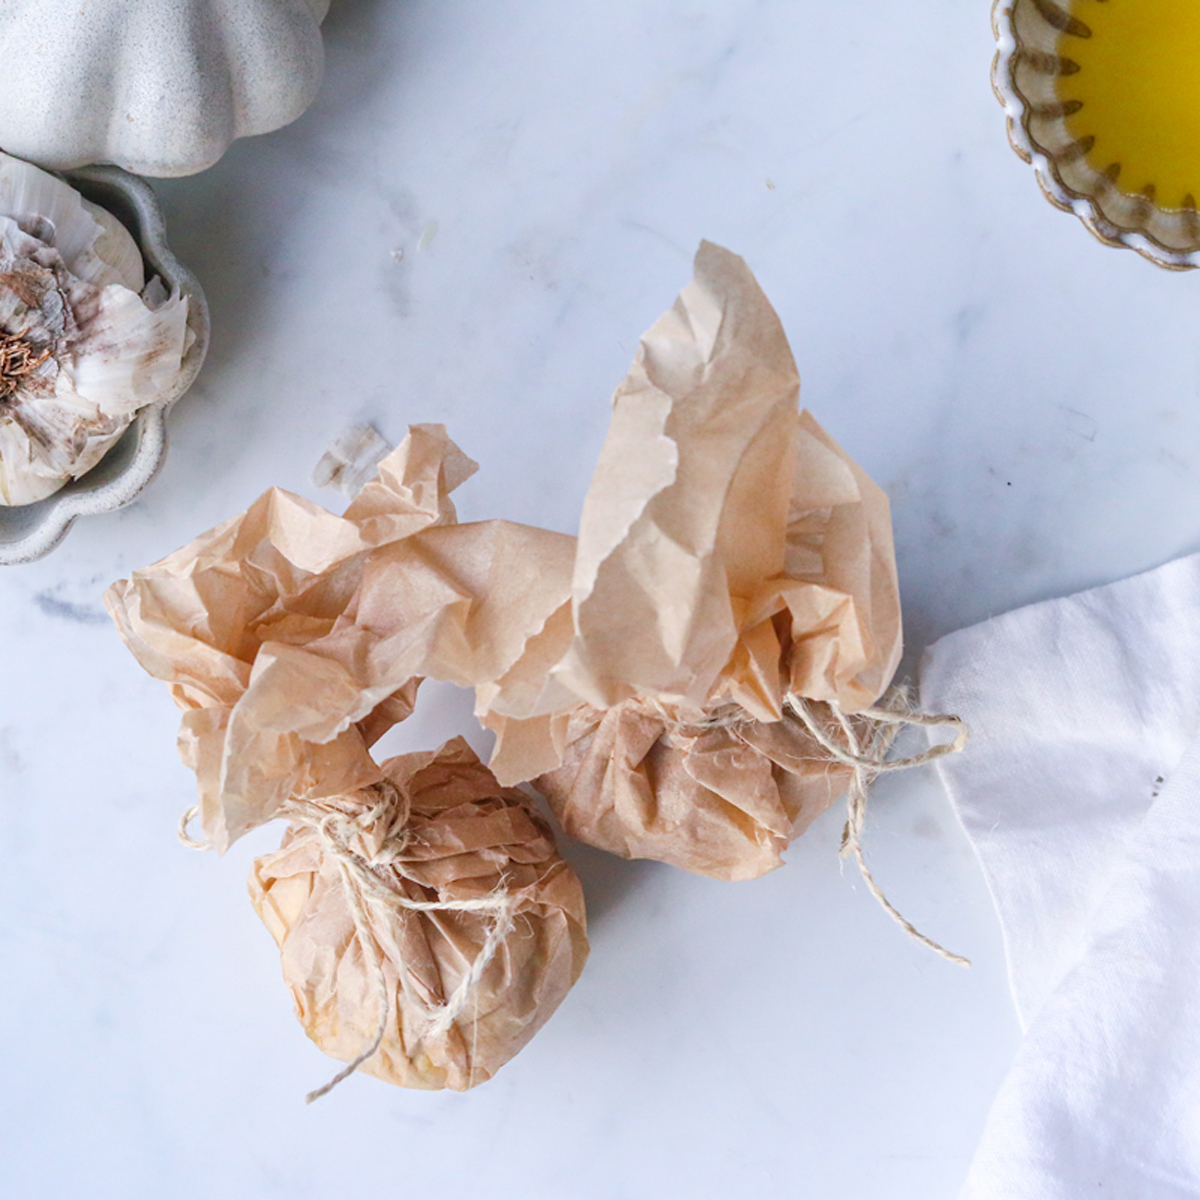 Garlic wrapped in parchment paper